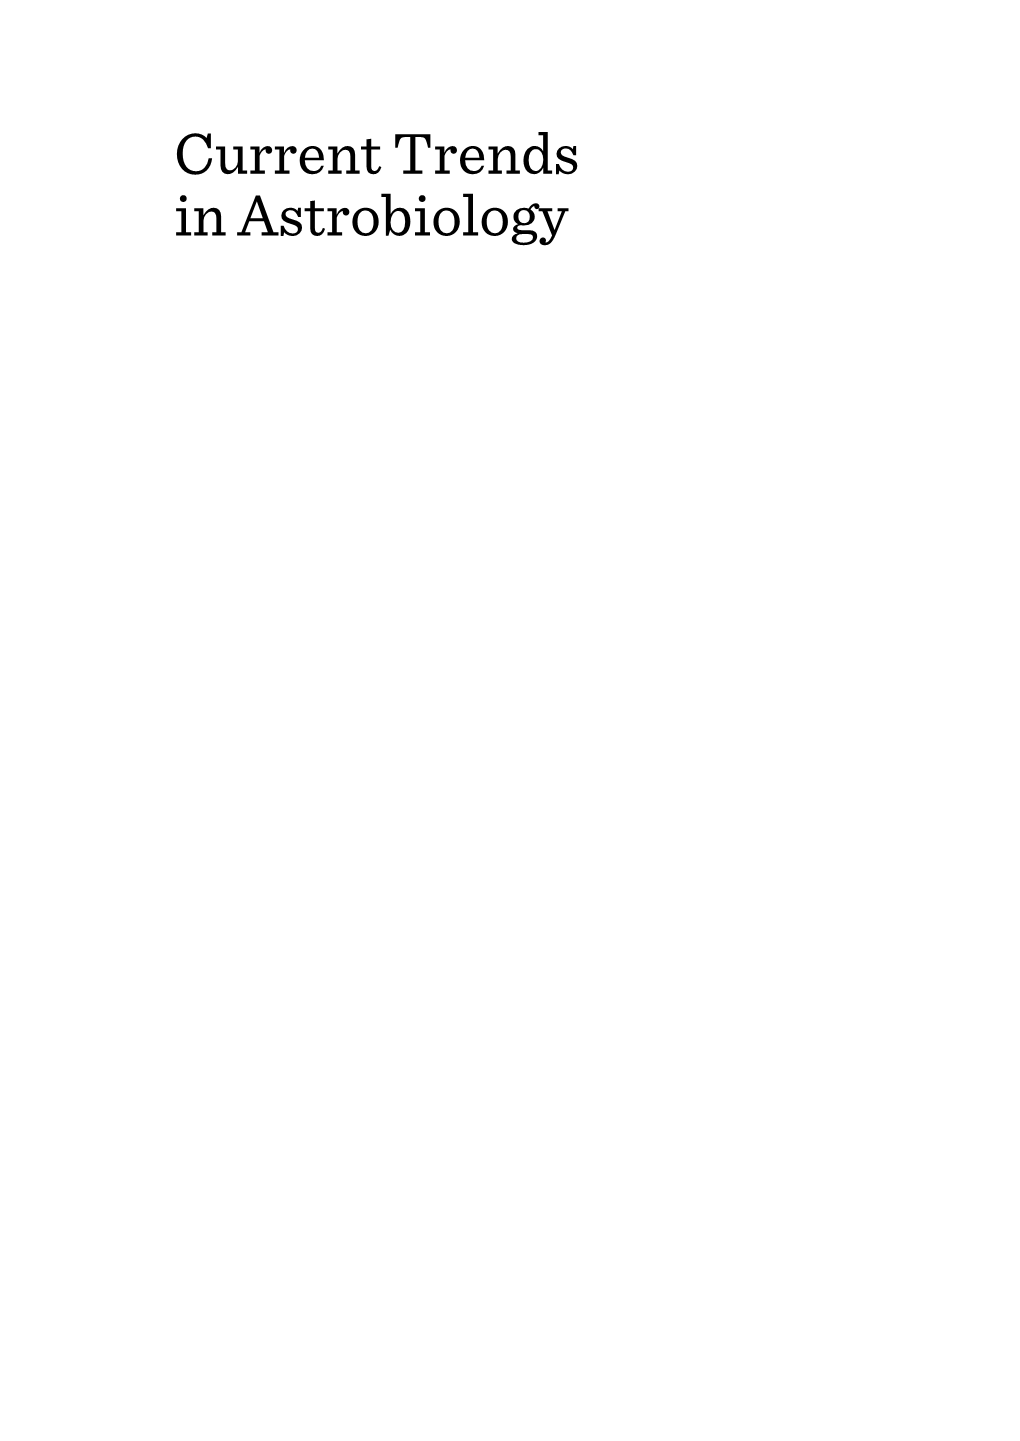 Current Trends in Astrobiology